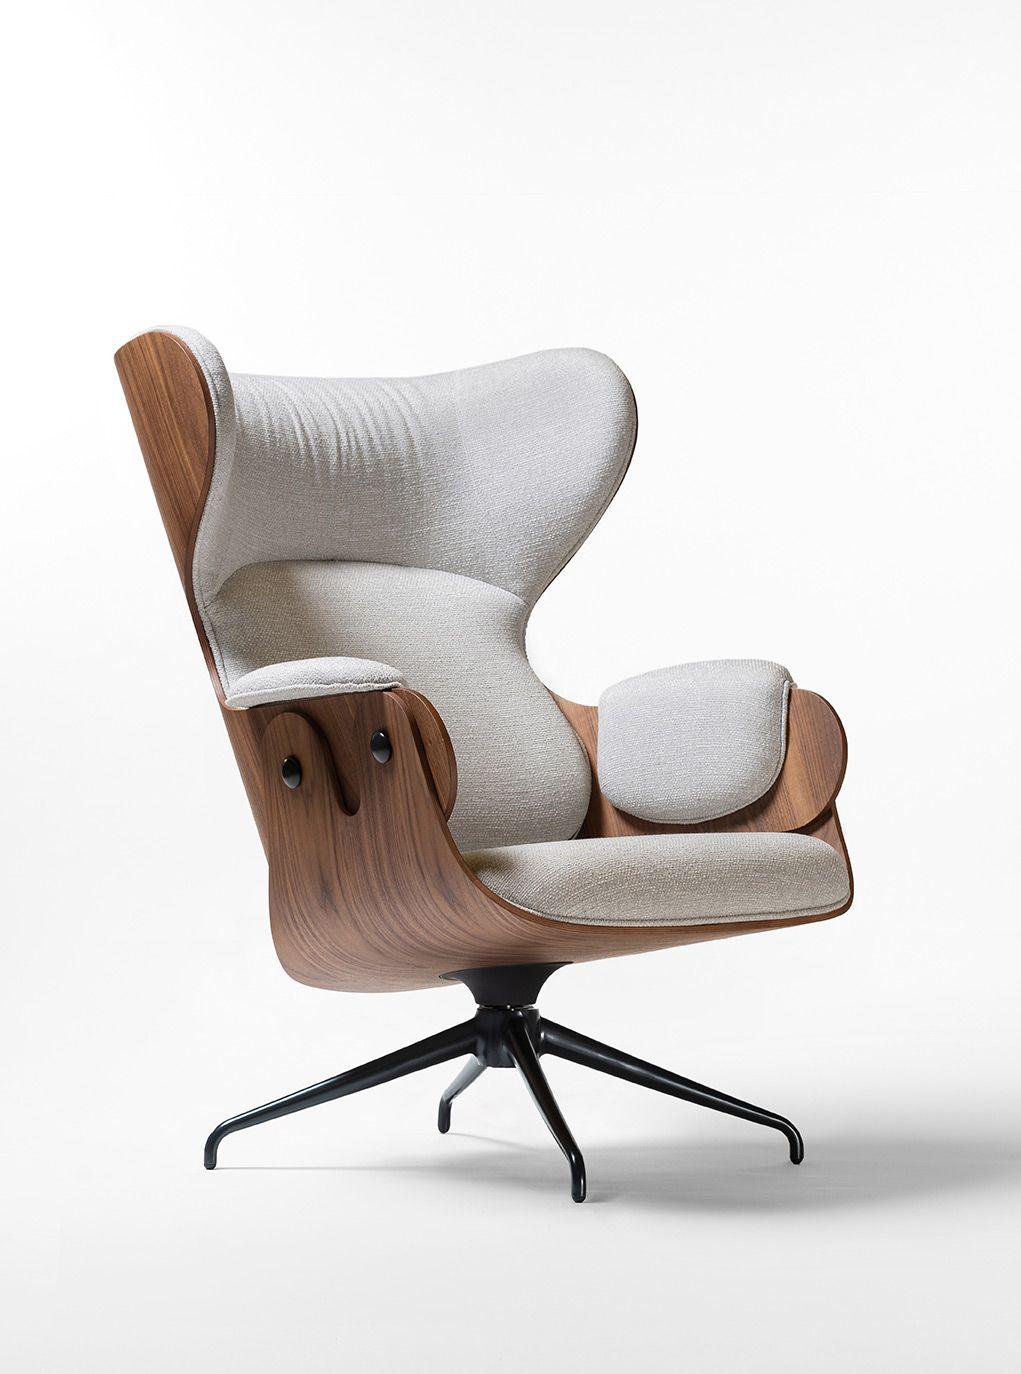 Spanish Lounger Armchair by Jaime Hayon For Sale